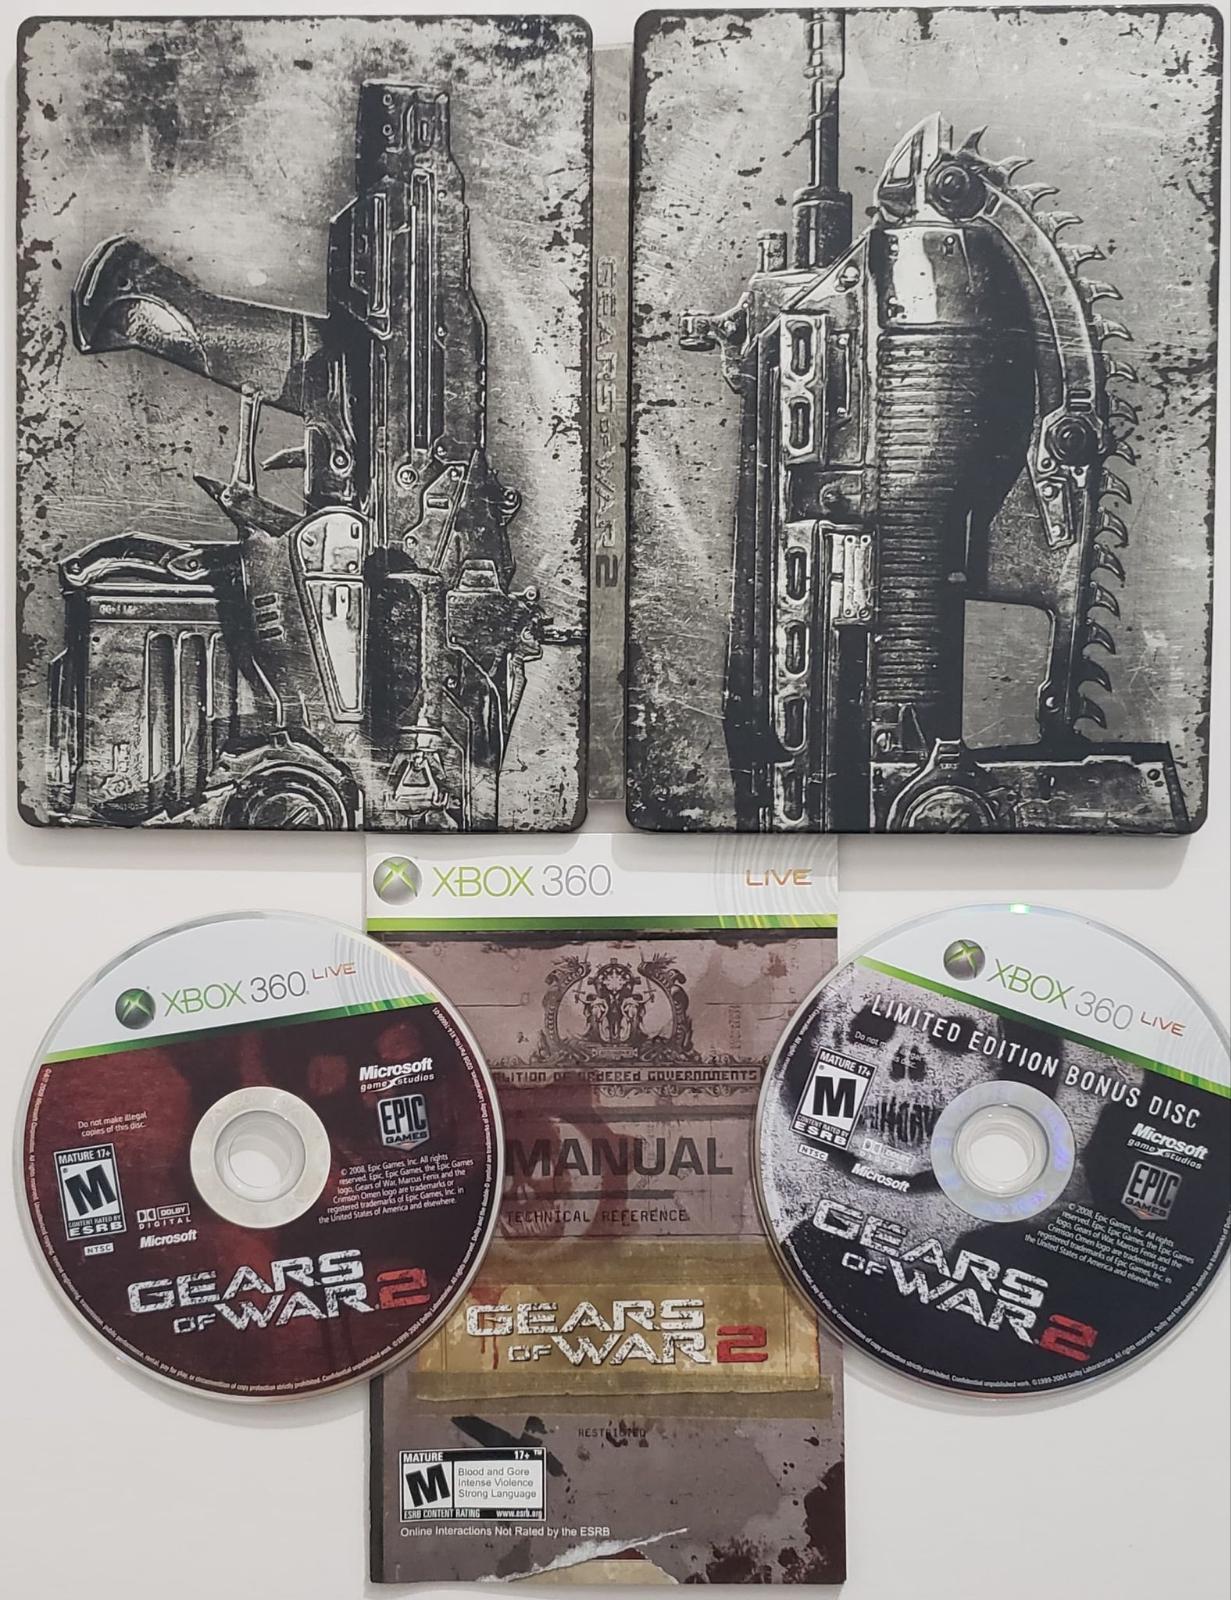 Gears of War 2 [Limited Edition] for Xbox360, Xbox One